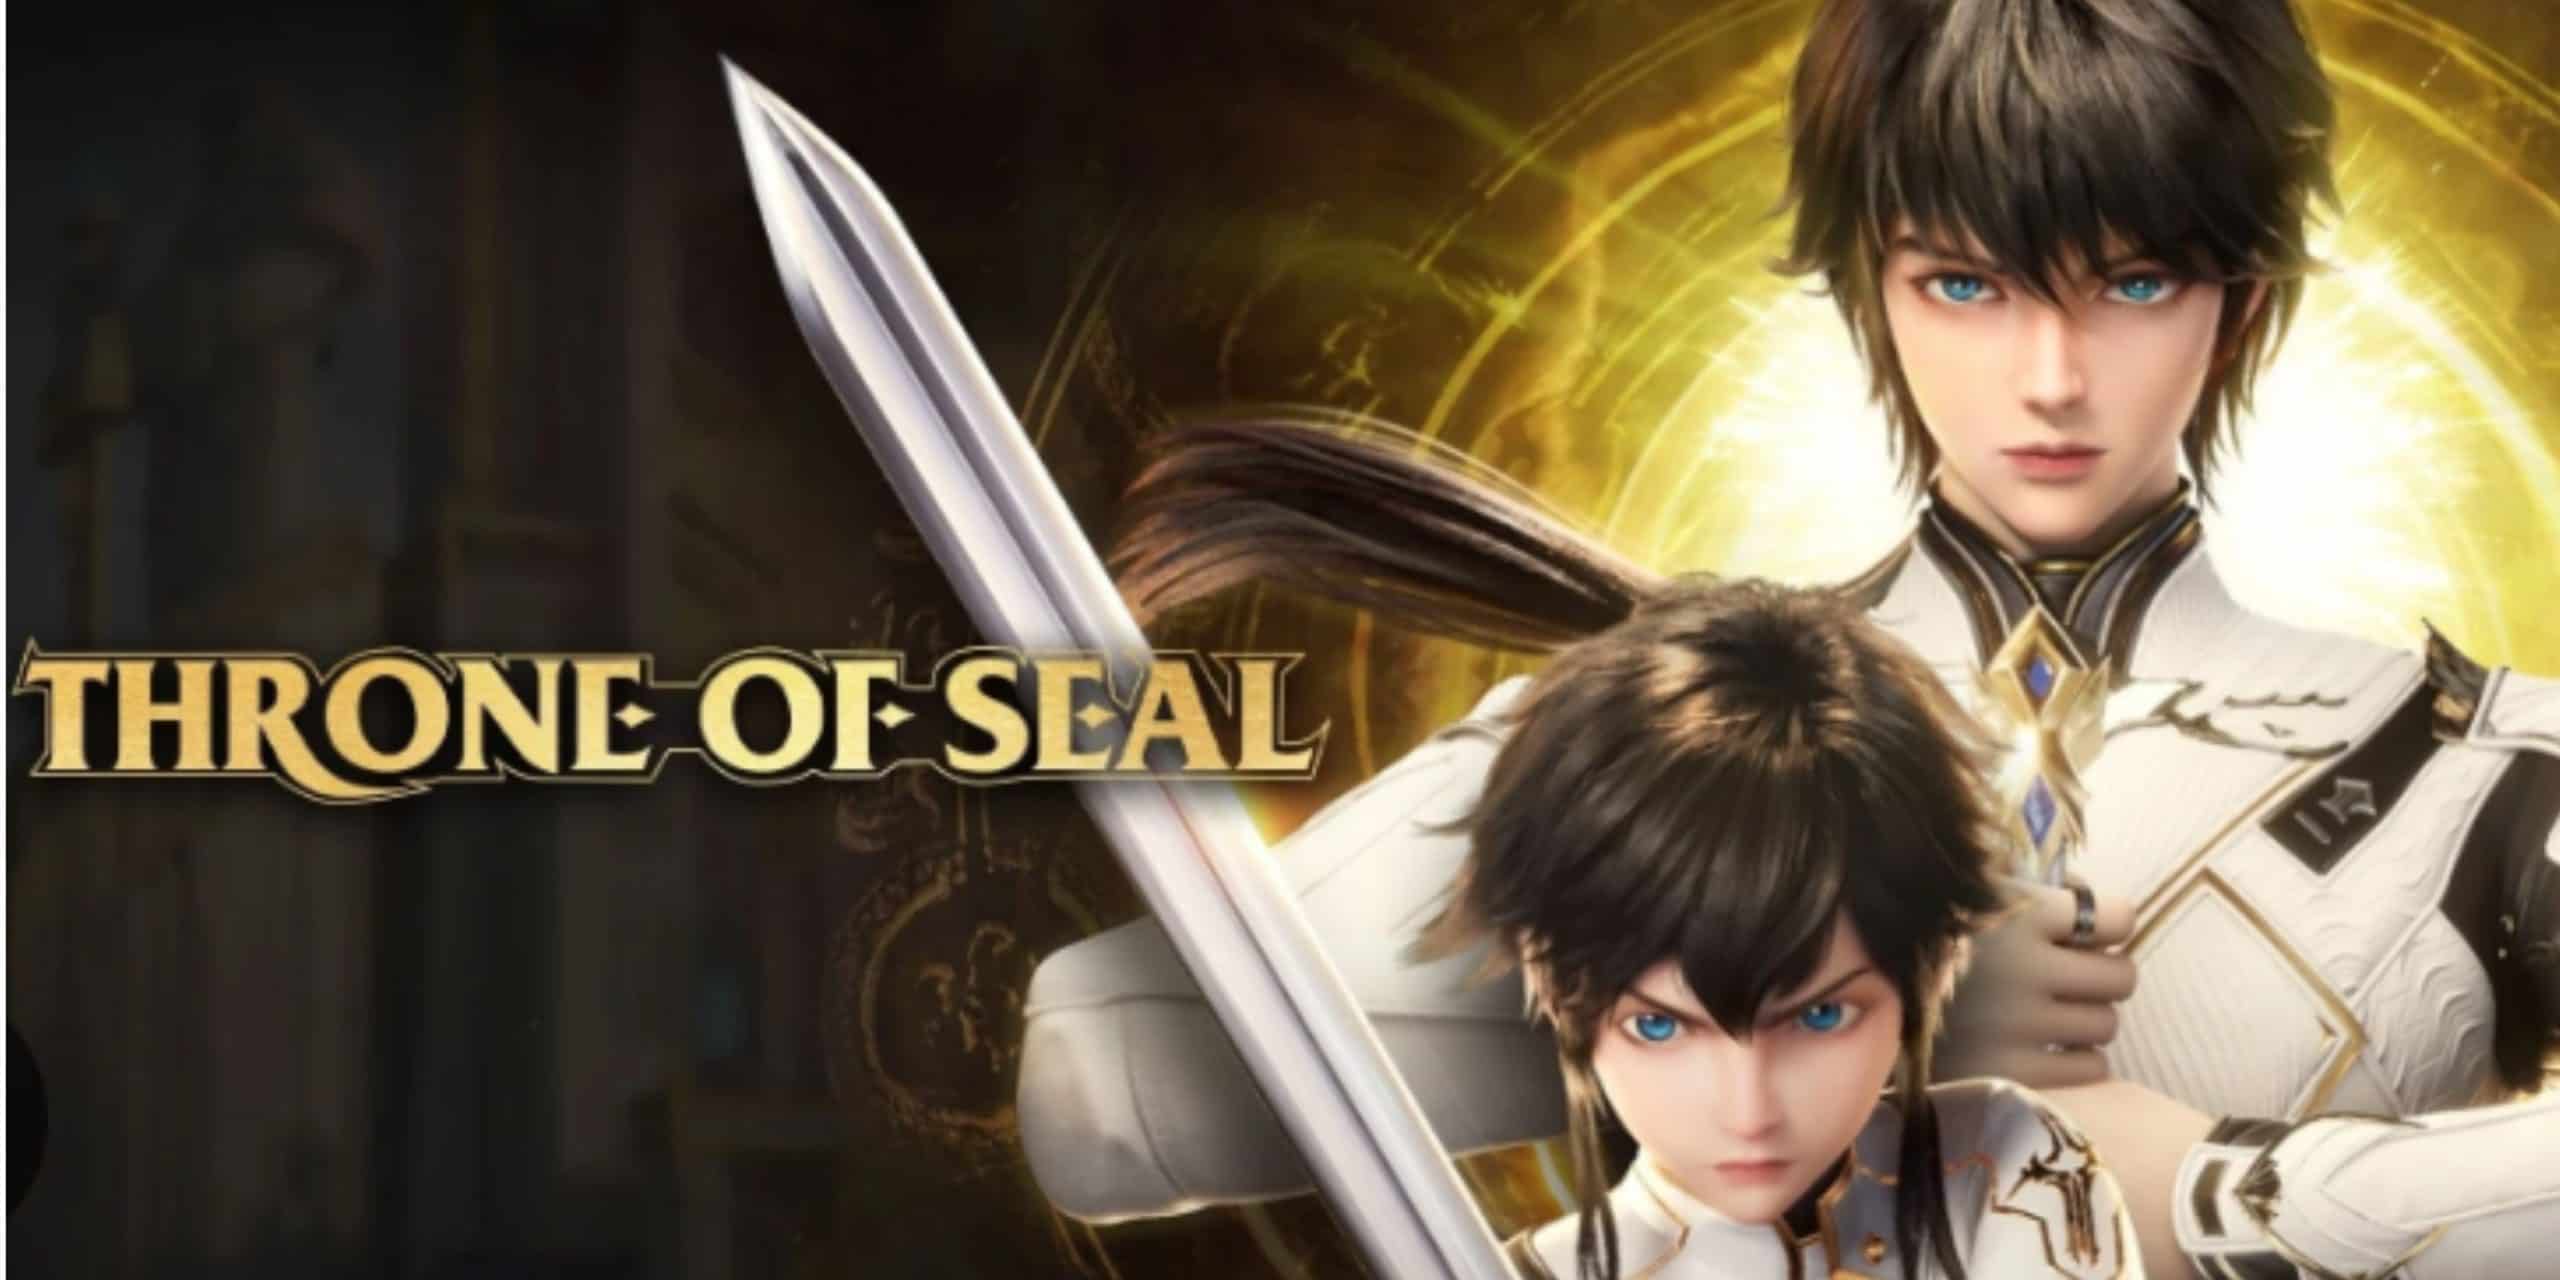 Throne of Seal Chinese Fantasy Anime Episode 48 Synopsis